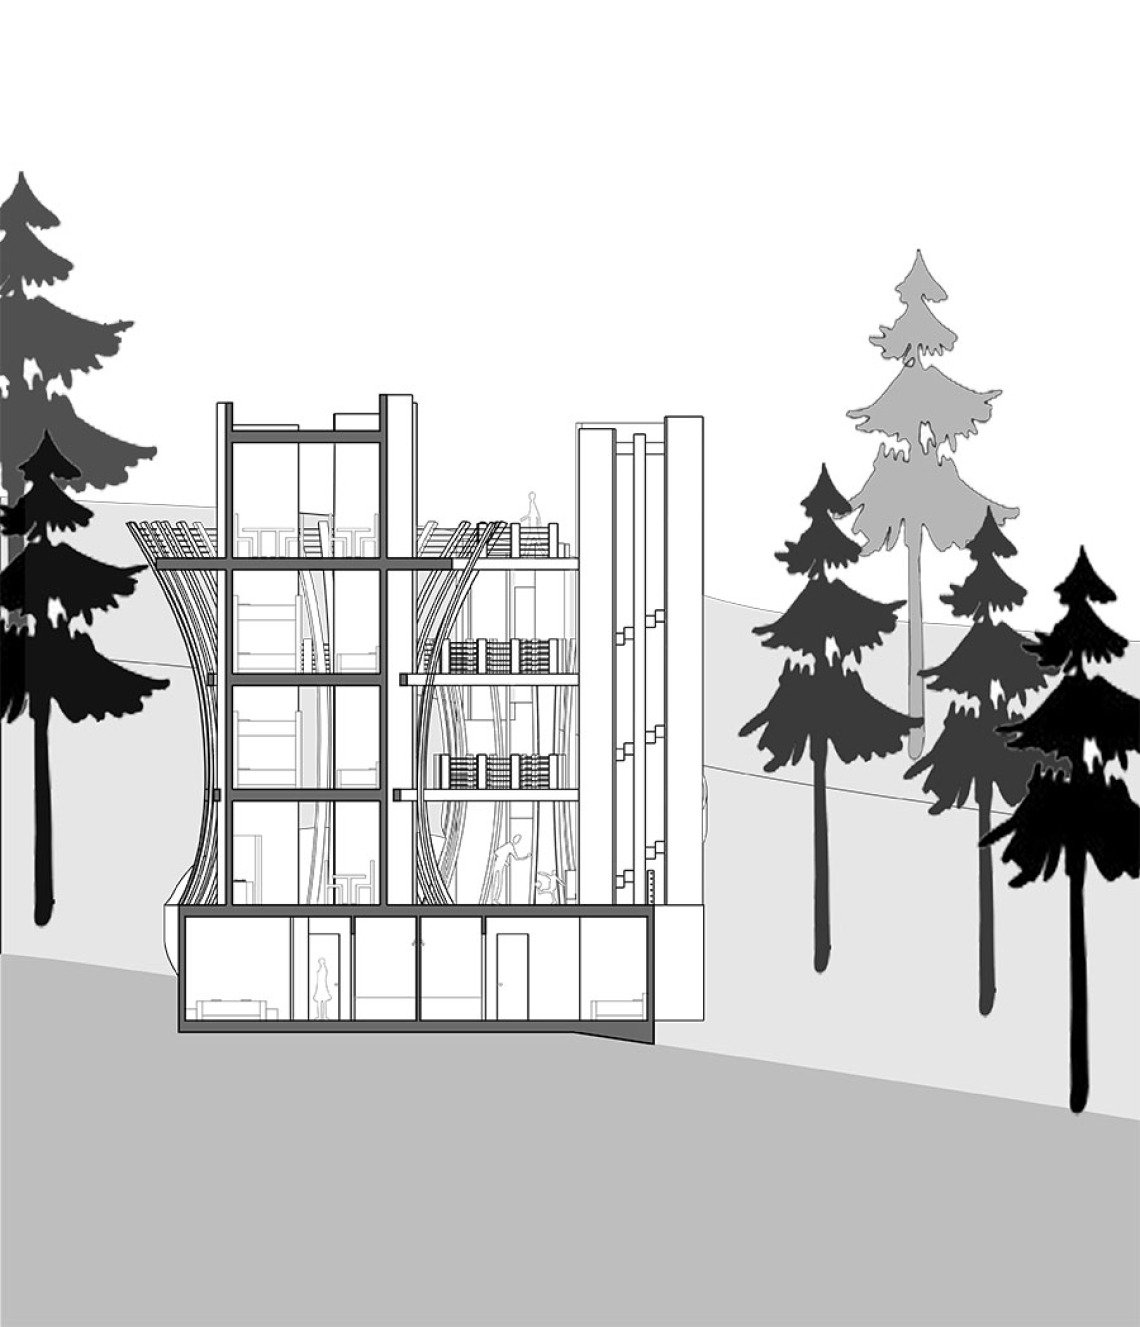 Climate and Research Center cross-section drawing by Lydia Roberts